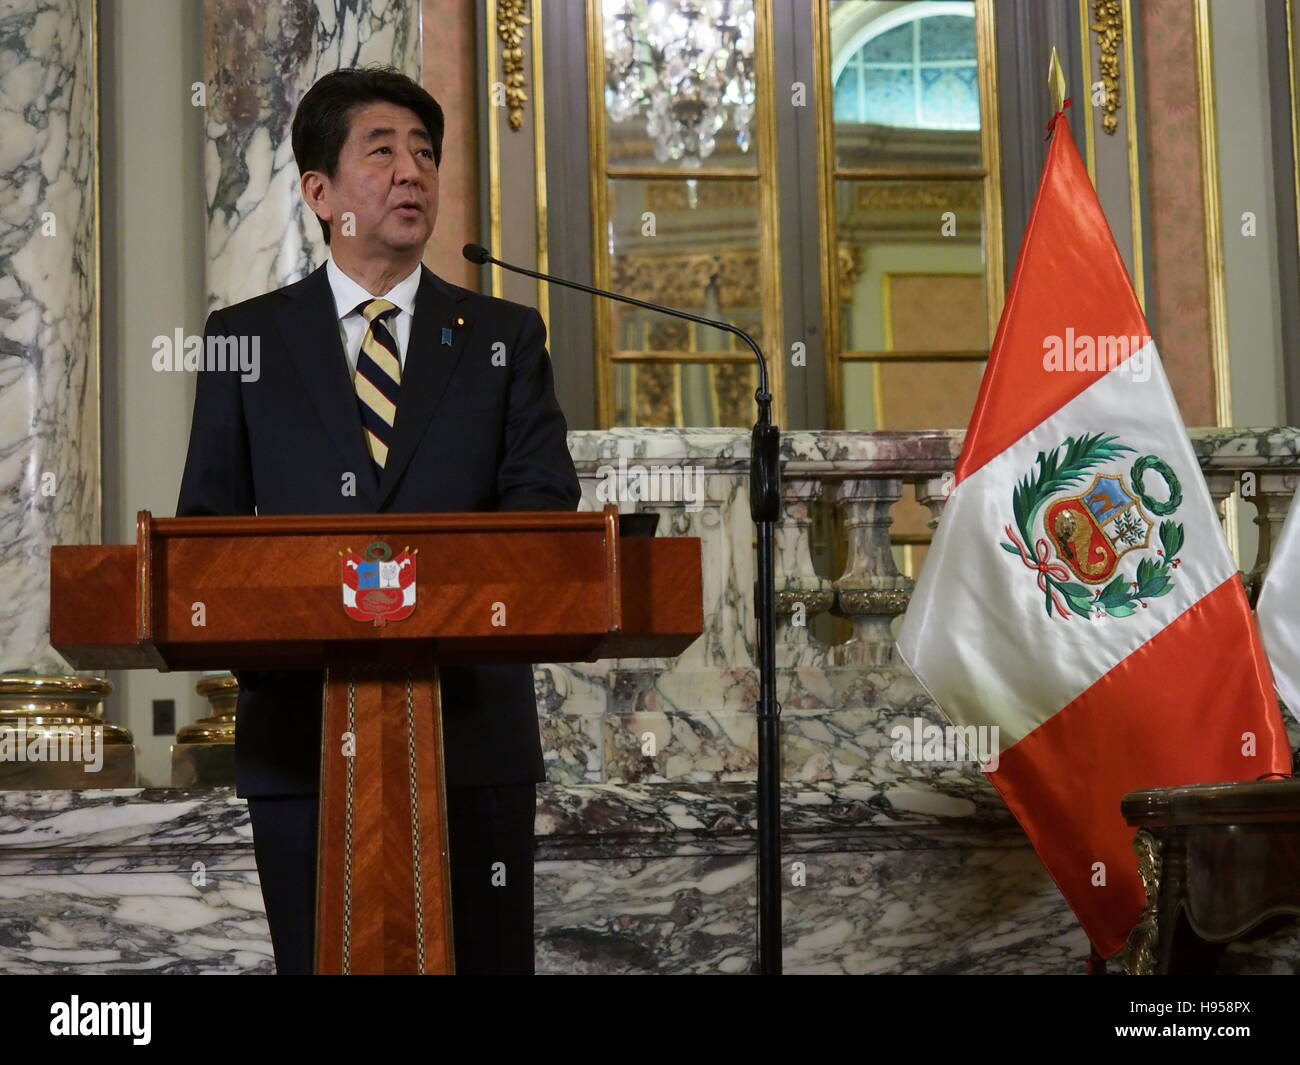 Lima, Peru. 18 November, 2016. Prime Minister of Japan, Shinzo Abe, arrived to Peru on an official visit within the framework of APEC 2016. The Prime Minister was received by the President of Peru, Pedro Pablo Kuczynski, and participated in a series of activities, such as the signing of bilateral agreements in communications (c) Carlos Garcia Granthon/Fotoholica/Alamy Live News Stock Photo